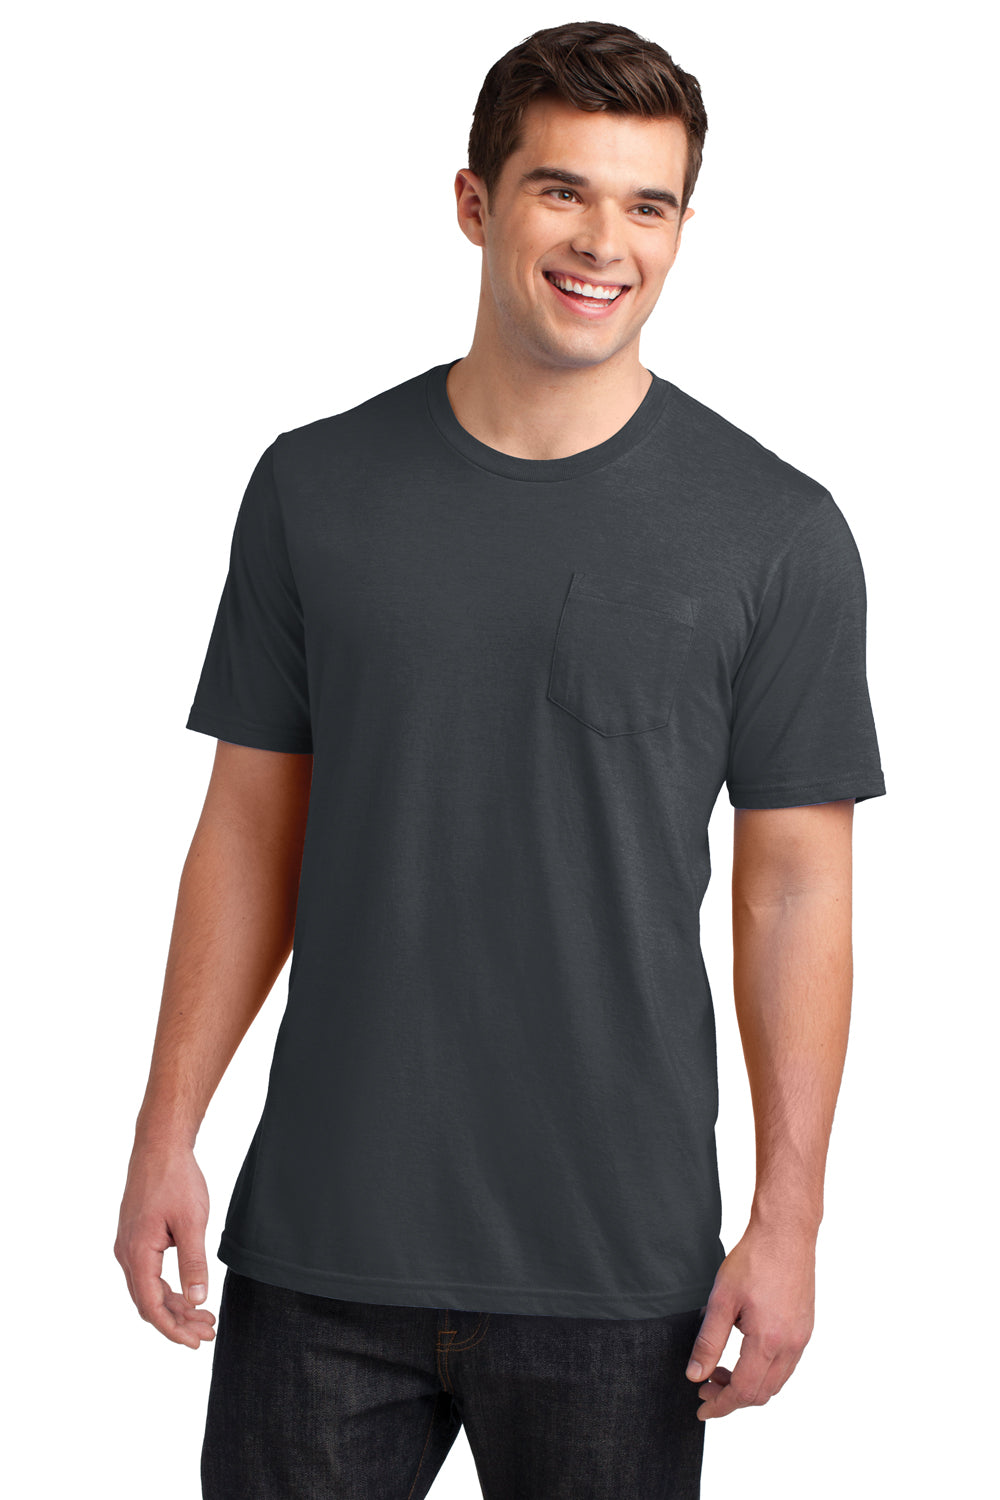 District DT6000P Mens Very Important Short Sleeve Crewneck T-Shirt w/ Pocket Charcoal Grey Front